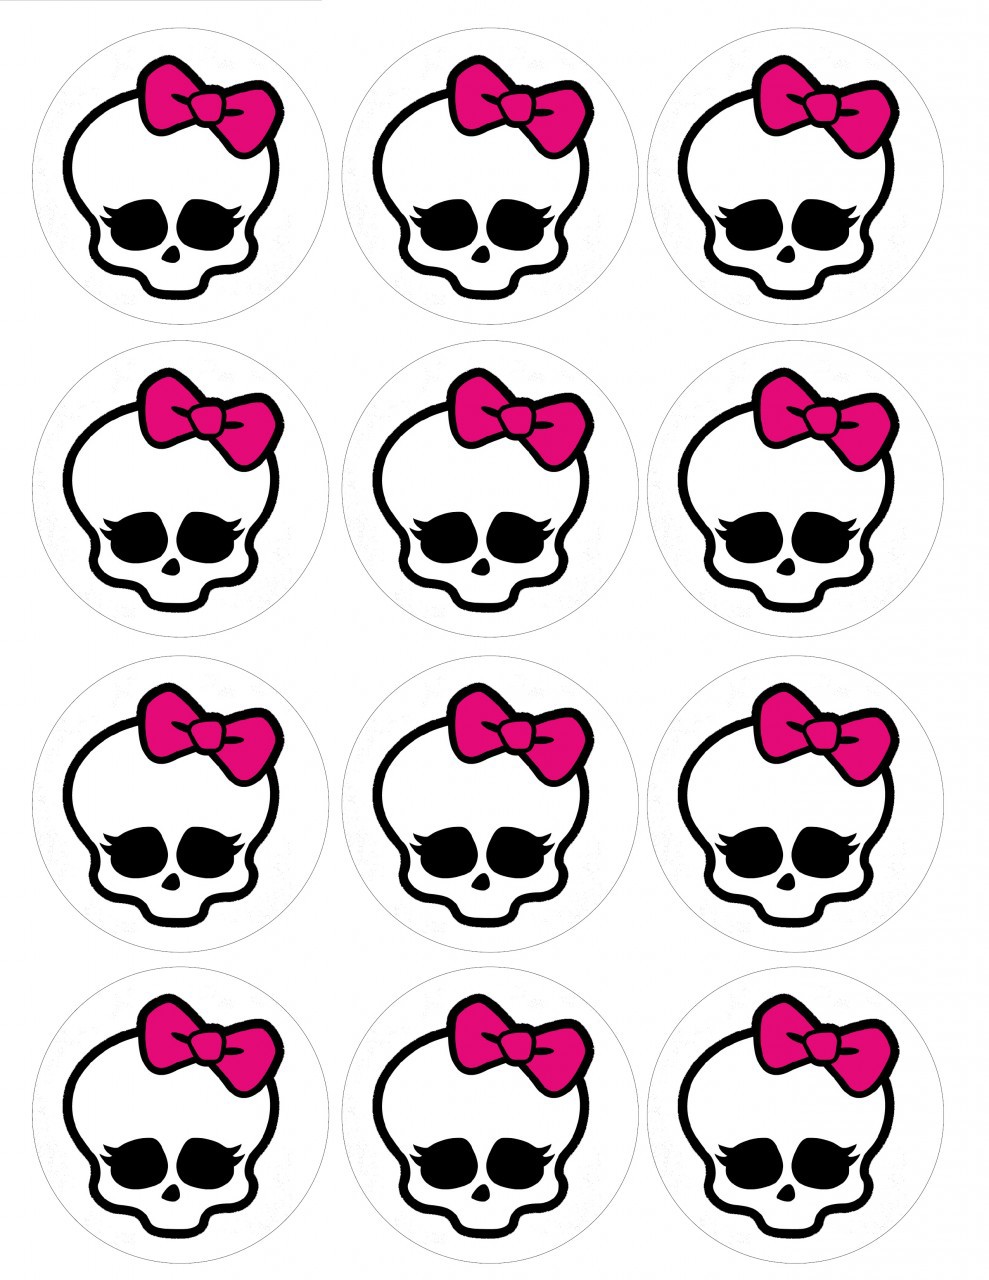 4 Best Images of Monster High Cupcake Topper Printables ...